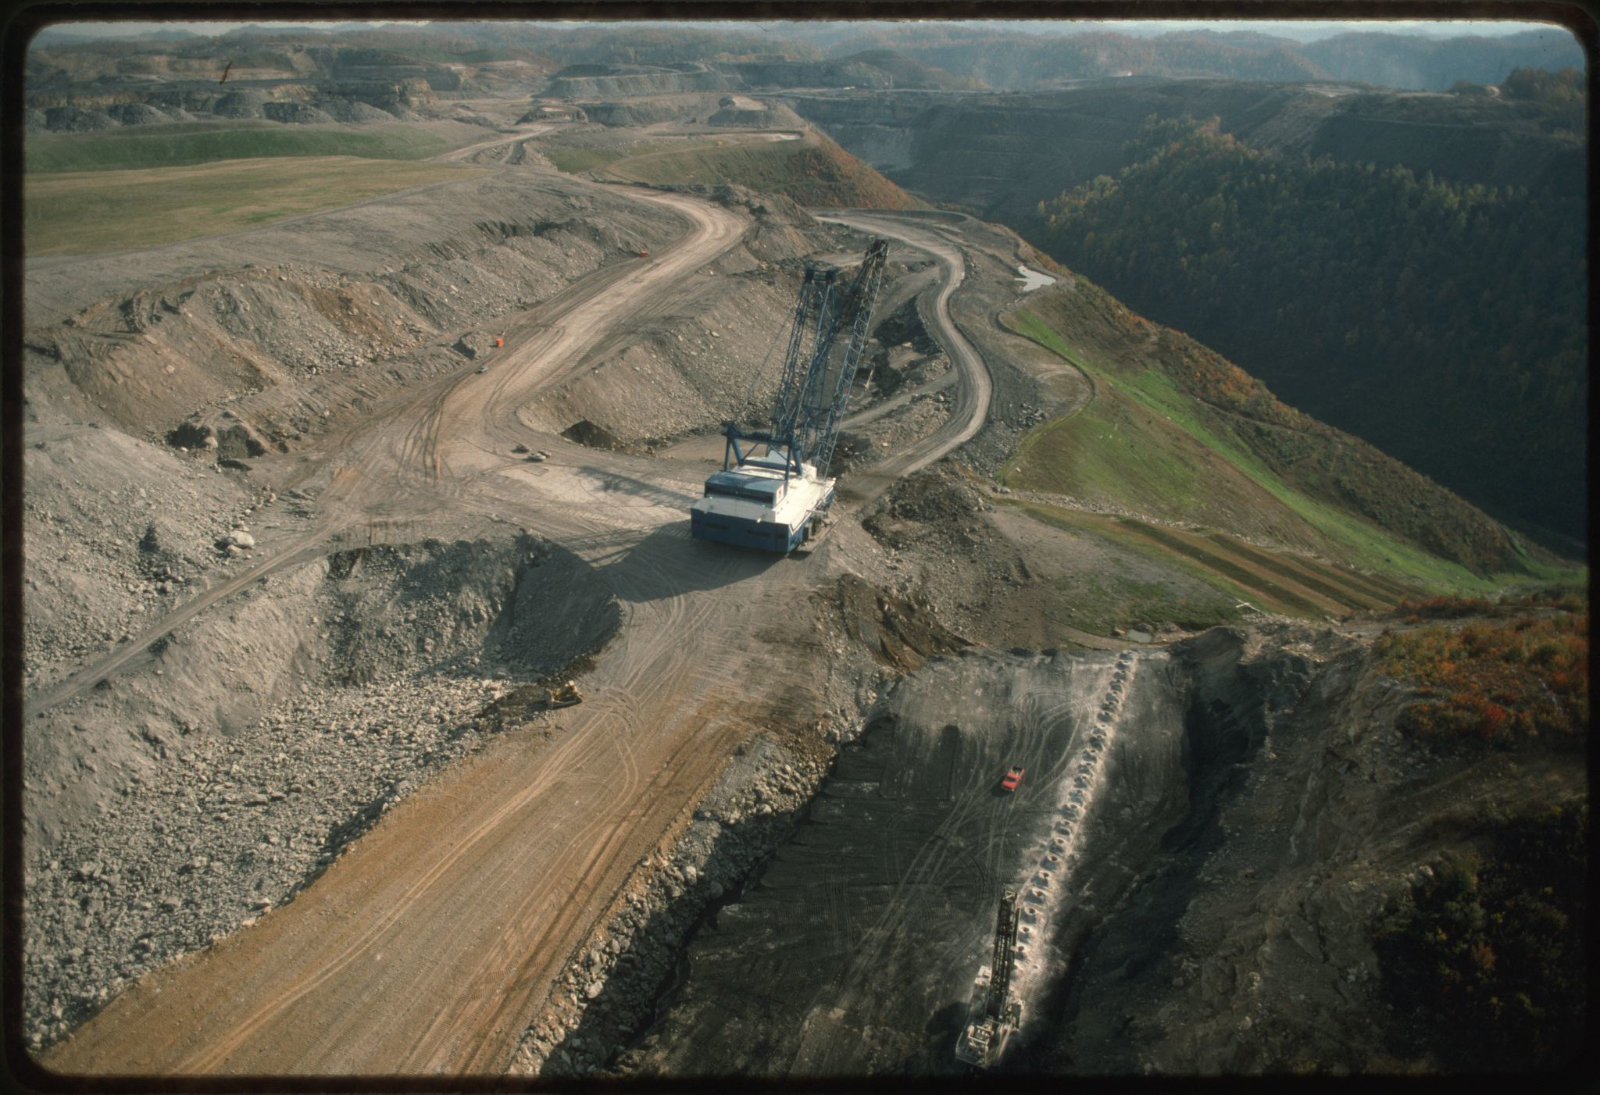 Aerial view of a mountaintop removal site with a large crane in the middle and tree covered mountains in the distance